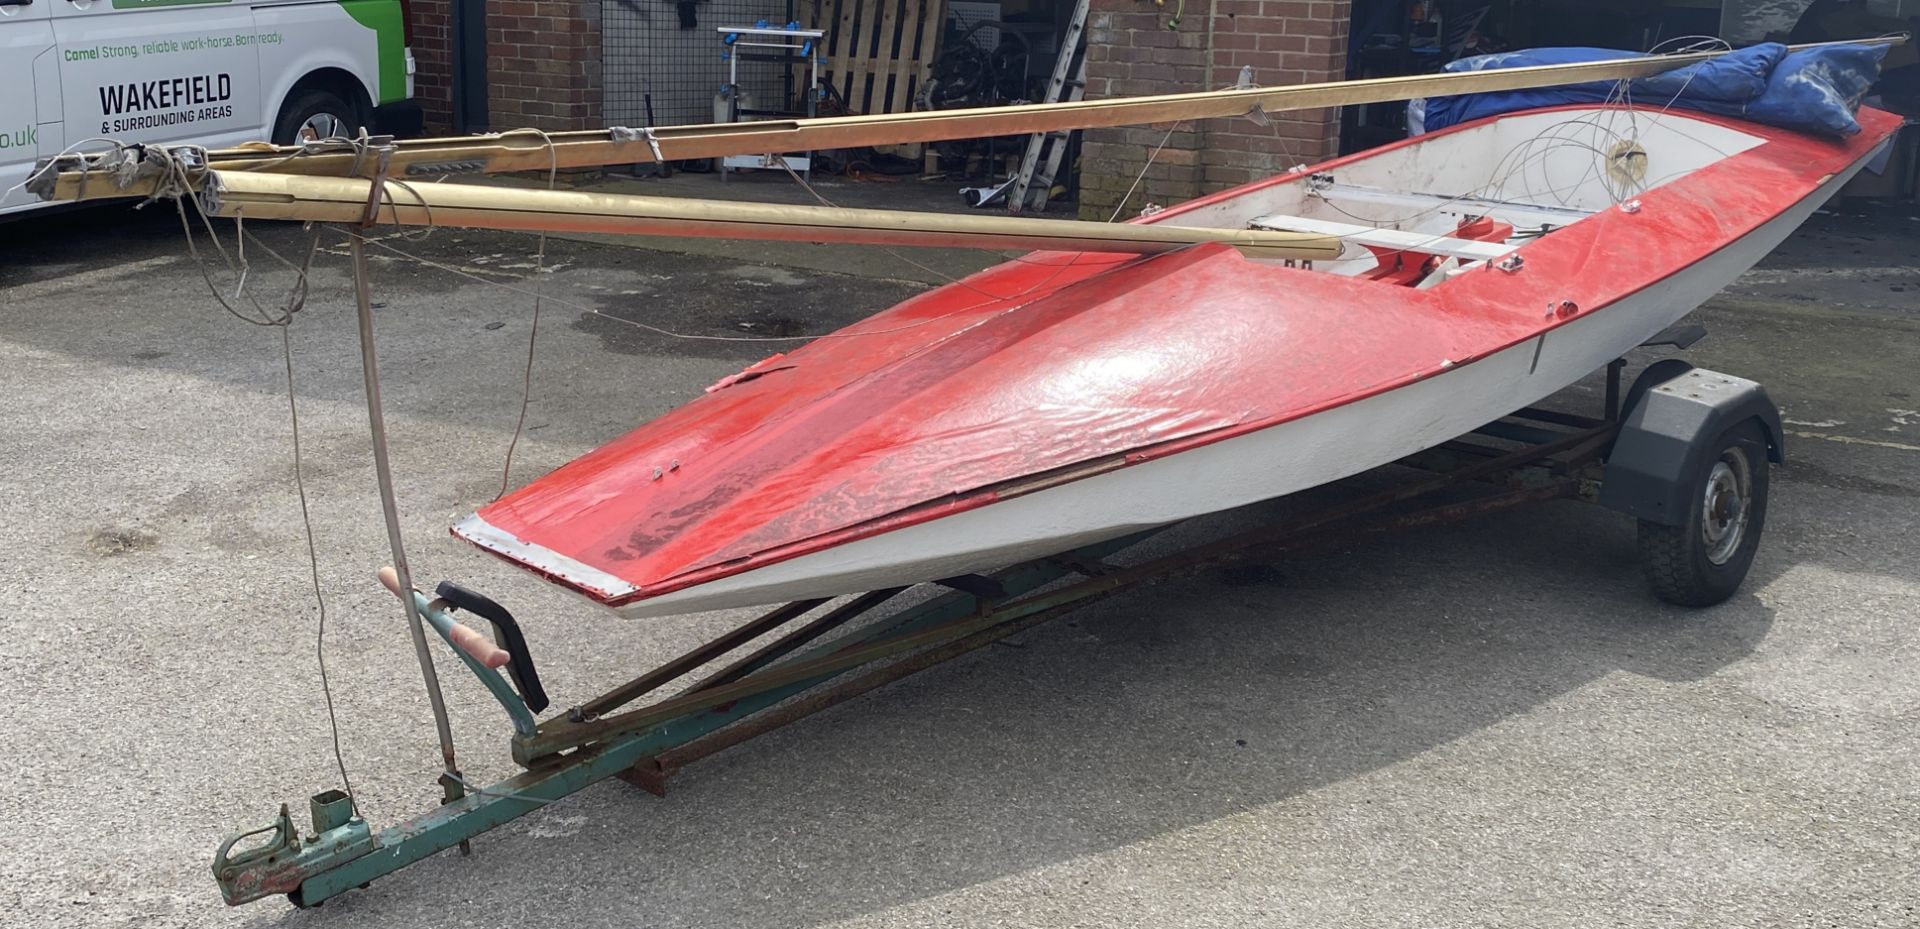 Red and white Fireball sailing boat with a 9' 9" (297cm) mast.